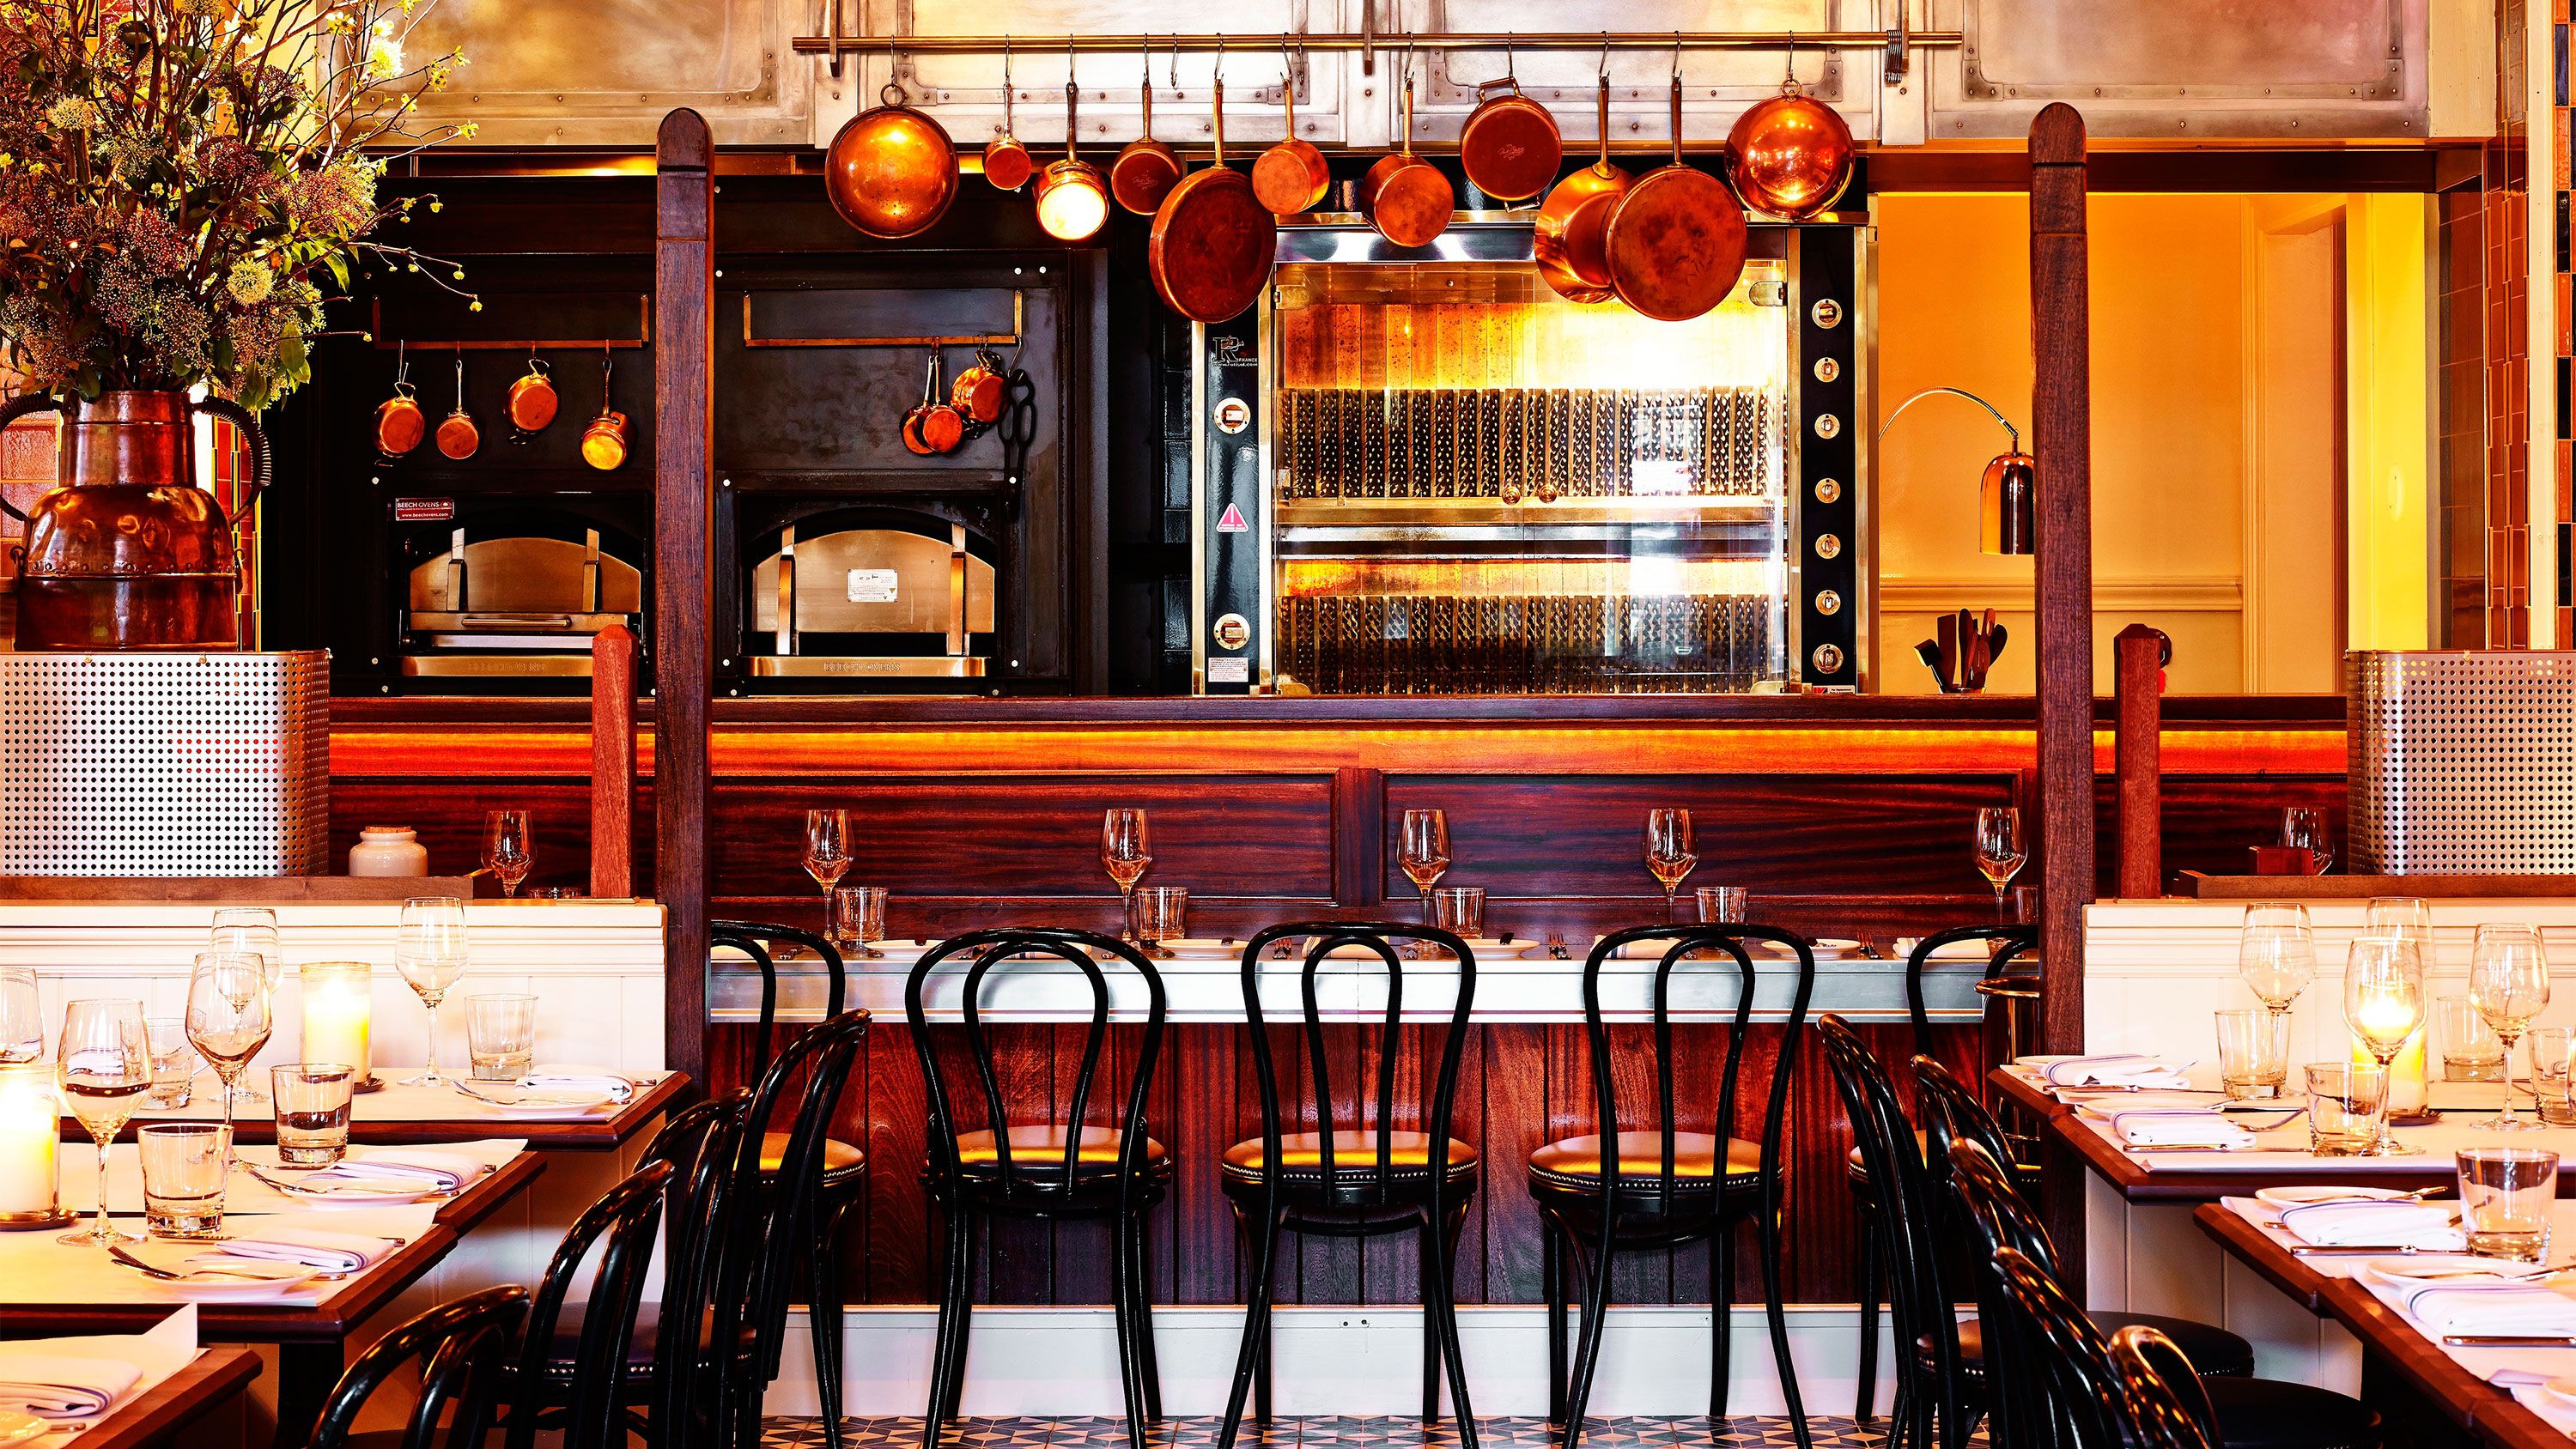 theLIST: 10 French Restaurants to Visit in New York